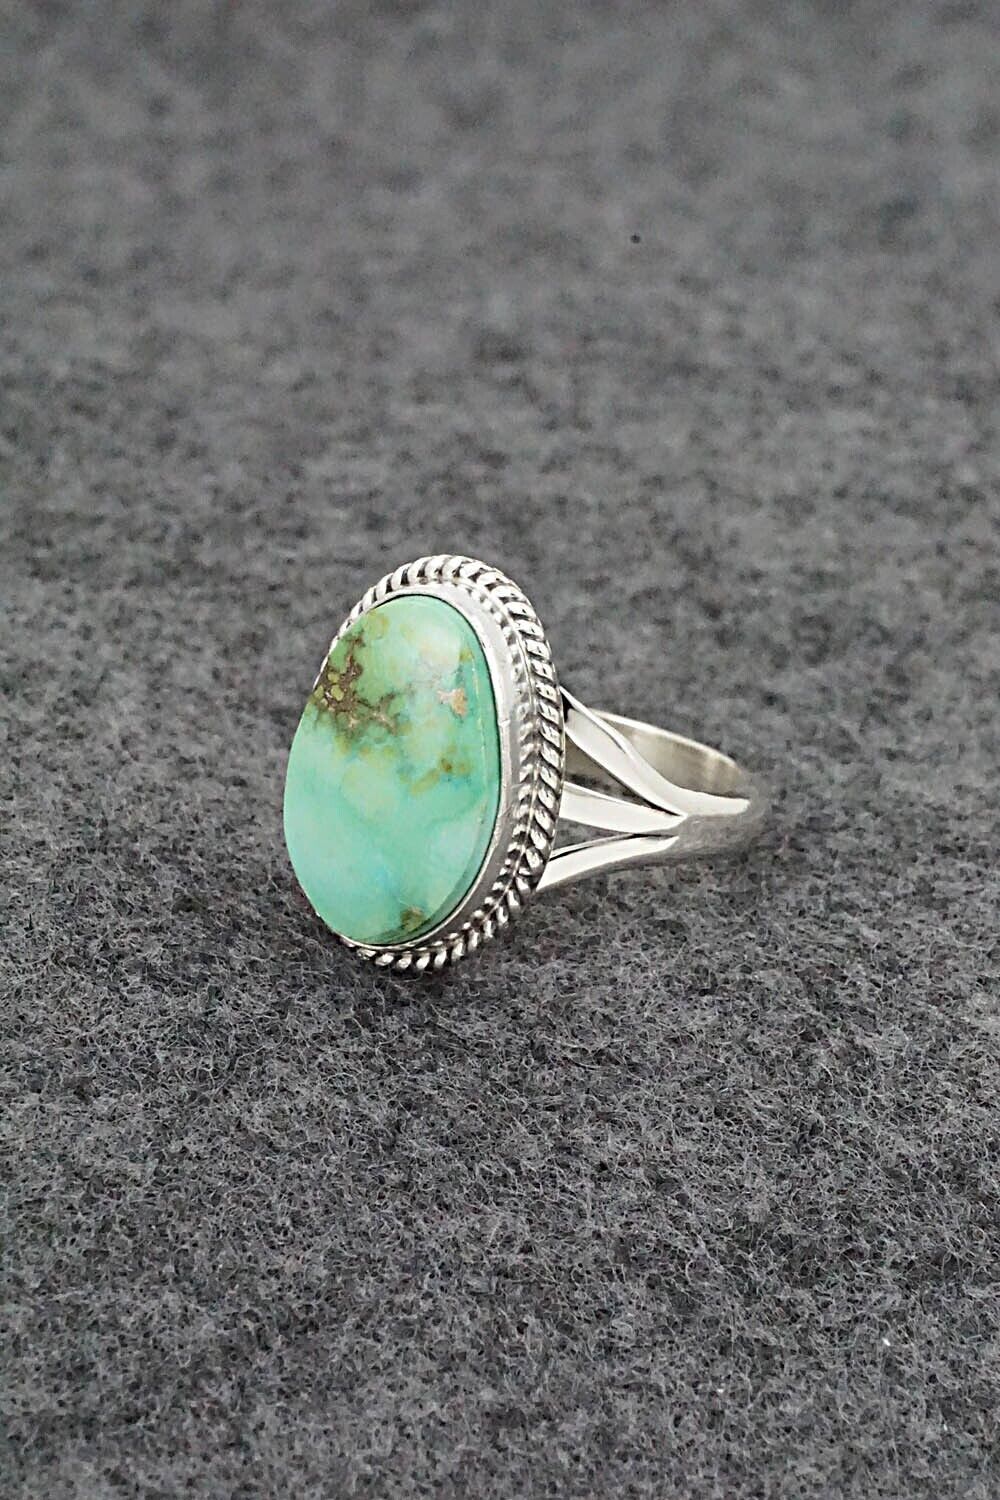 Turquoise & Sterling Silver Ring - Judy Largo - Size 8